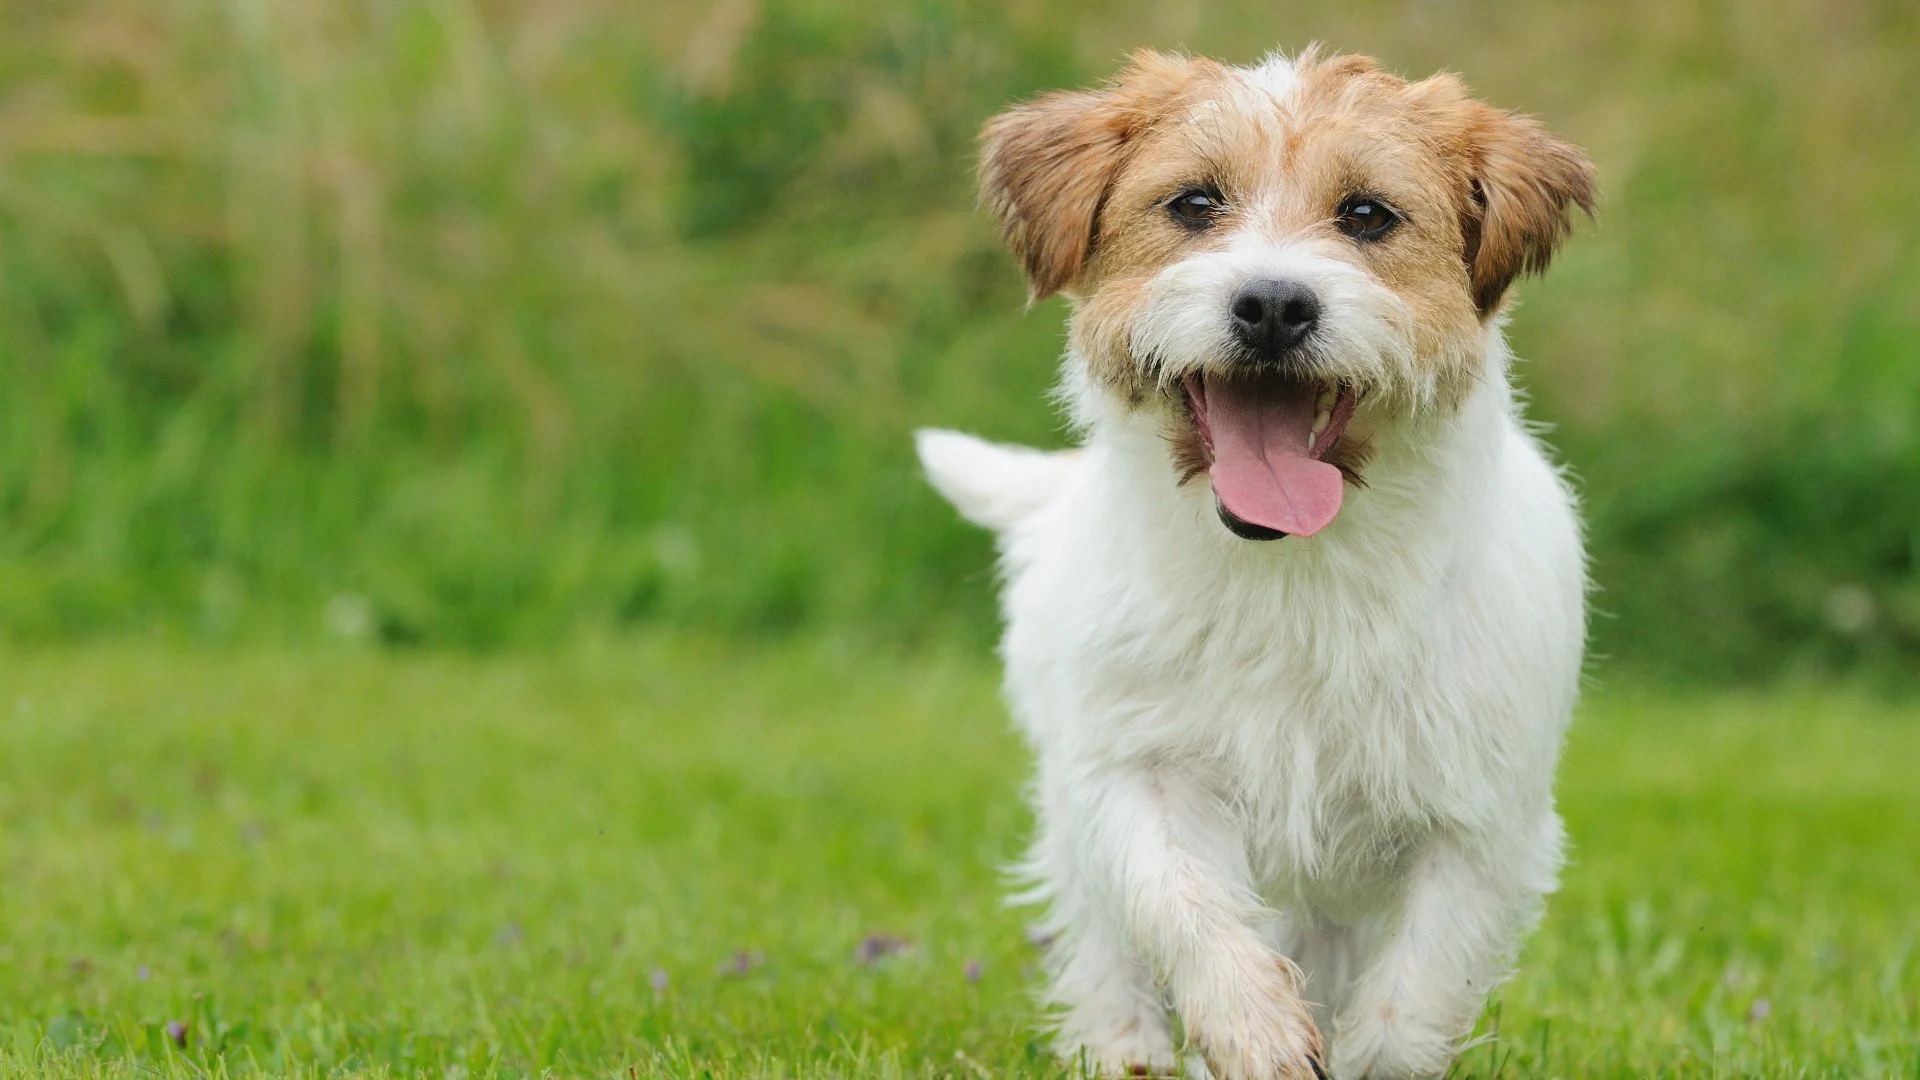 Helpful Tips to Keep Your Pets Safe During a Lawn Care Application